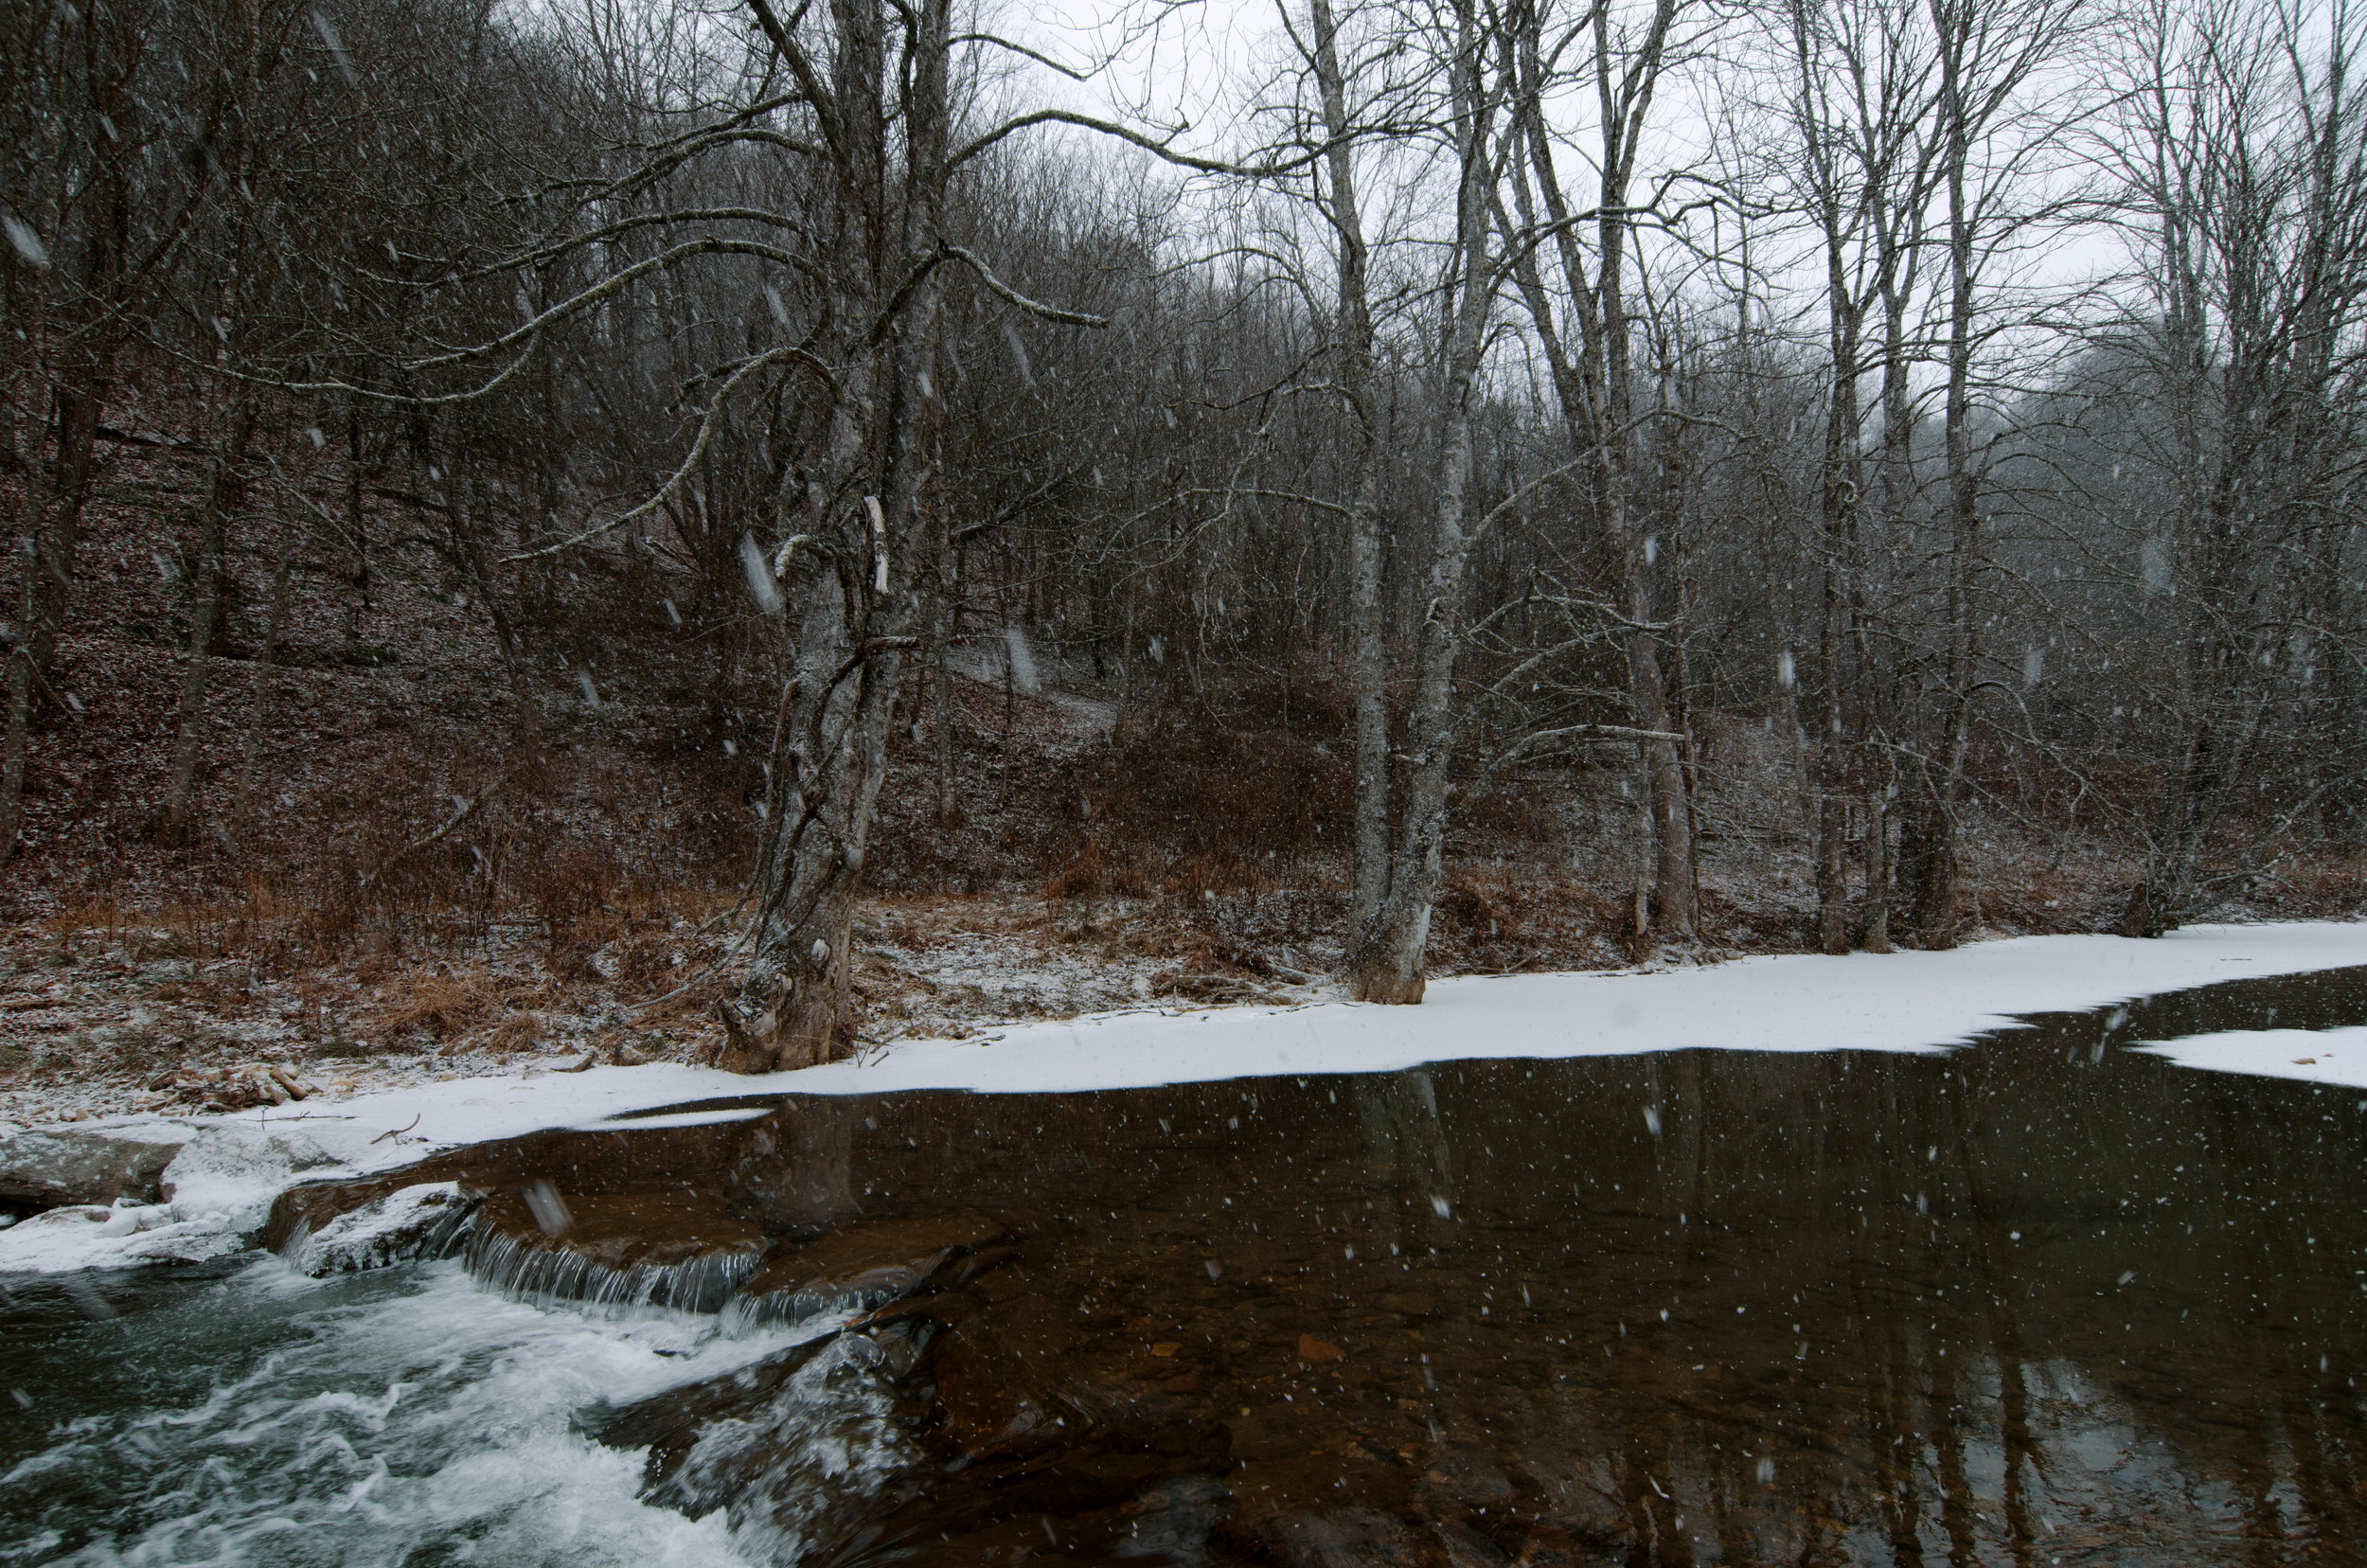  An exploration of the wintery landscape of Ashe County, NC 